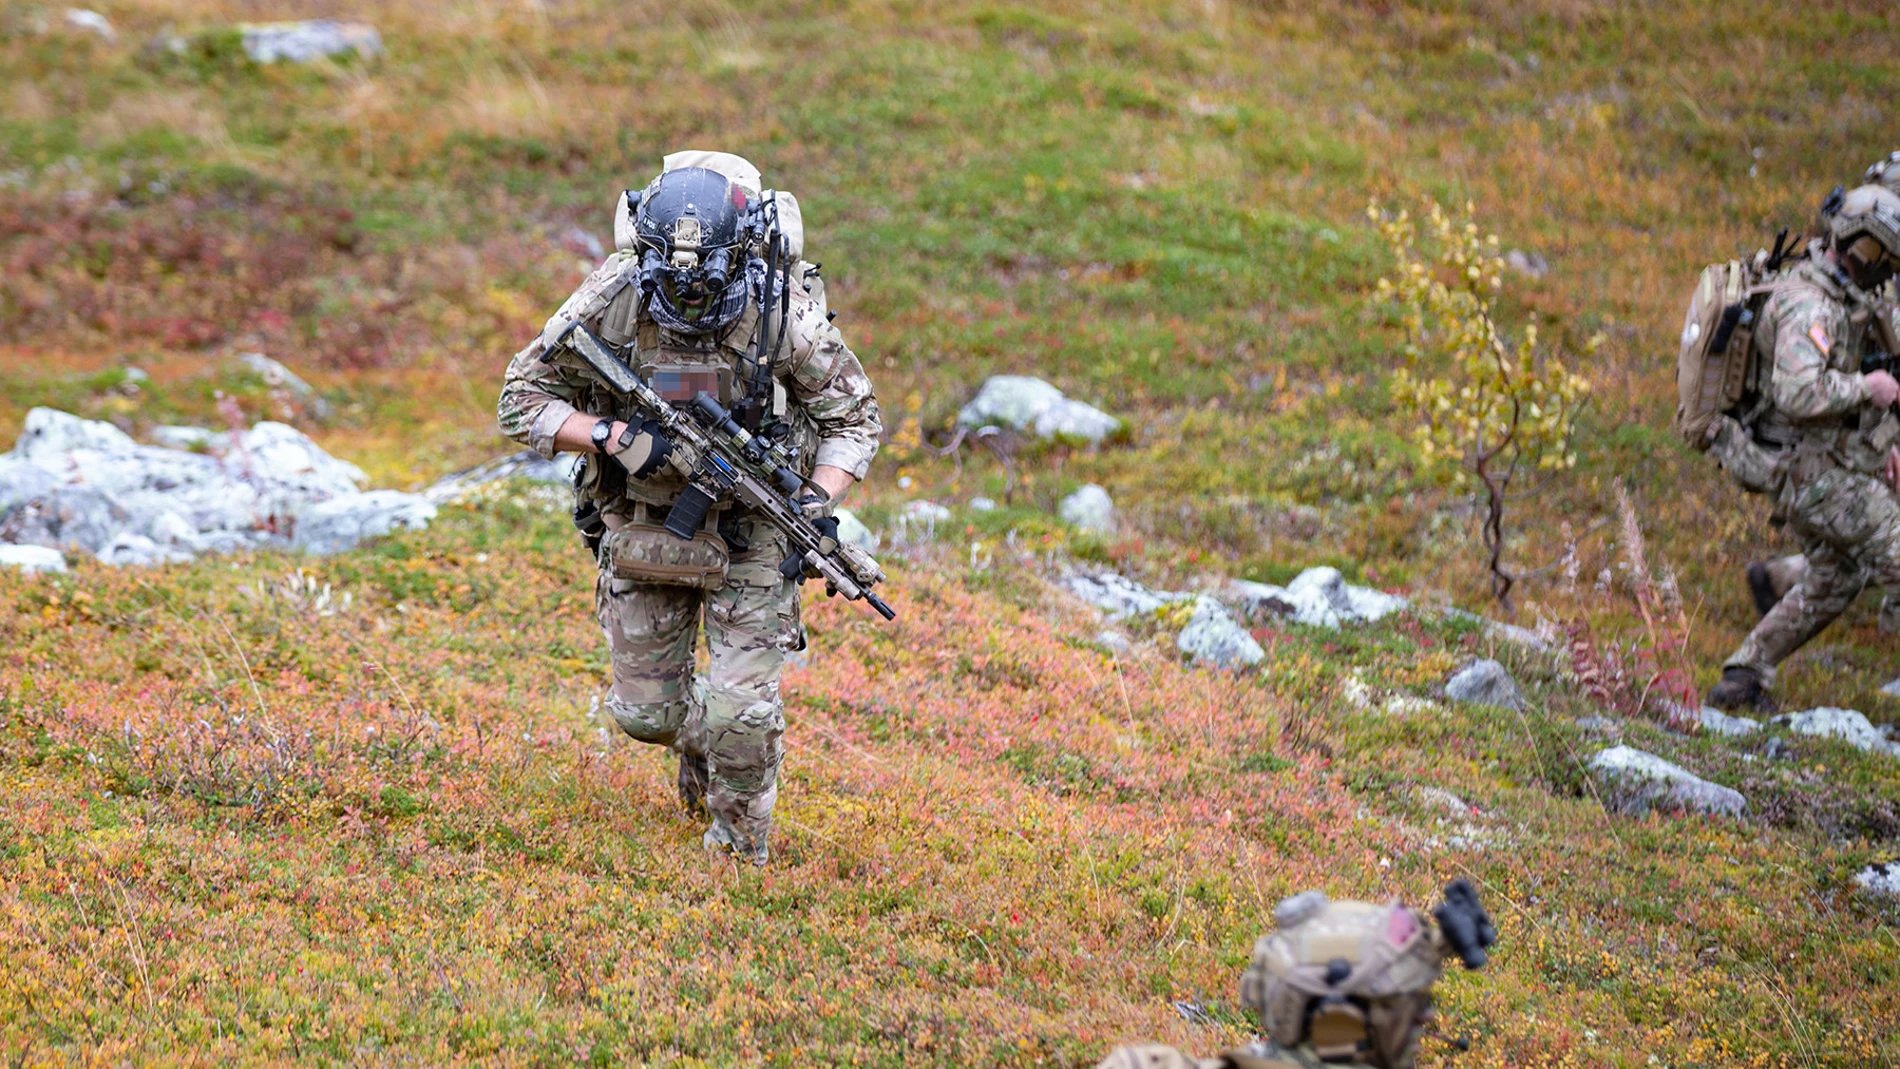 September 22, 2023 - Bardufoss, Norway - A Green Beret with U.S. Army 10th Special Forces Group (Airborne) moves to secure the area and begin searching for two injured pilots during a personnel recovery training scenario as part of exercise Adamant Serpent 23-2 near Bardufoss, Norway. (Foto de ARCHIVO) 22/09/2023